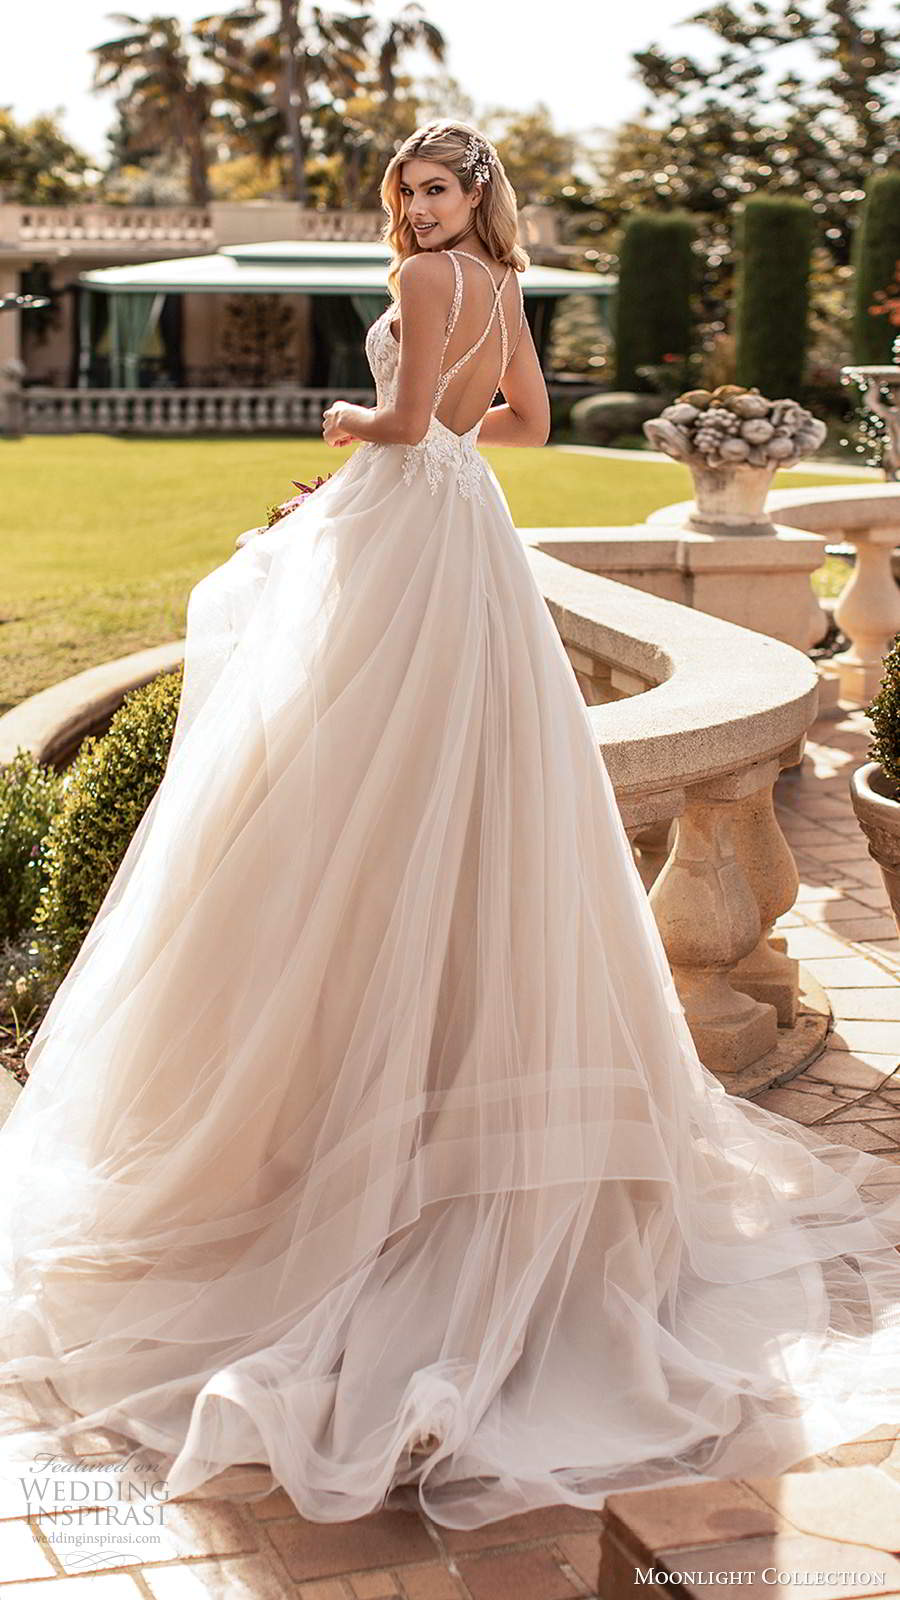 moonlight collection fall 2020 bridal sleeveless beaded straps sweetheart neckline embellished bodice a line ball gown wedding dress tiered skirt chapel train (4) bv